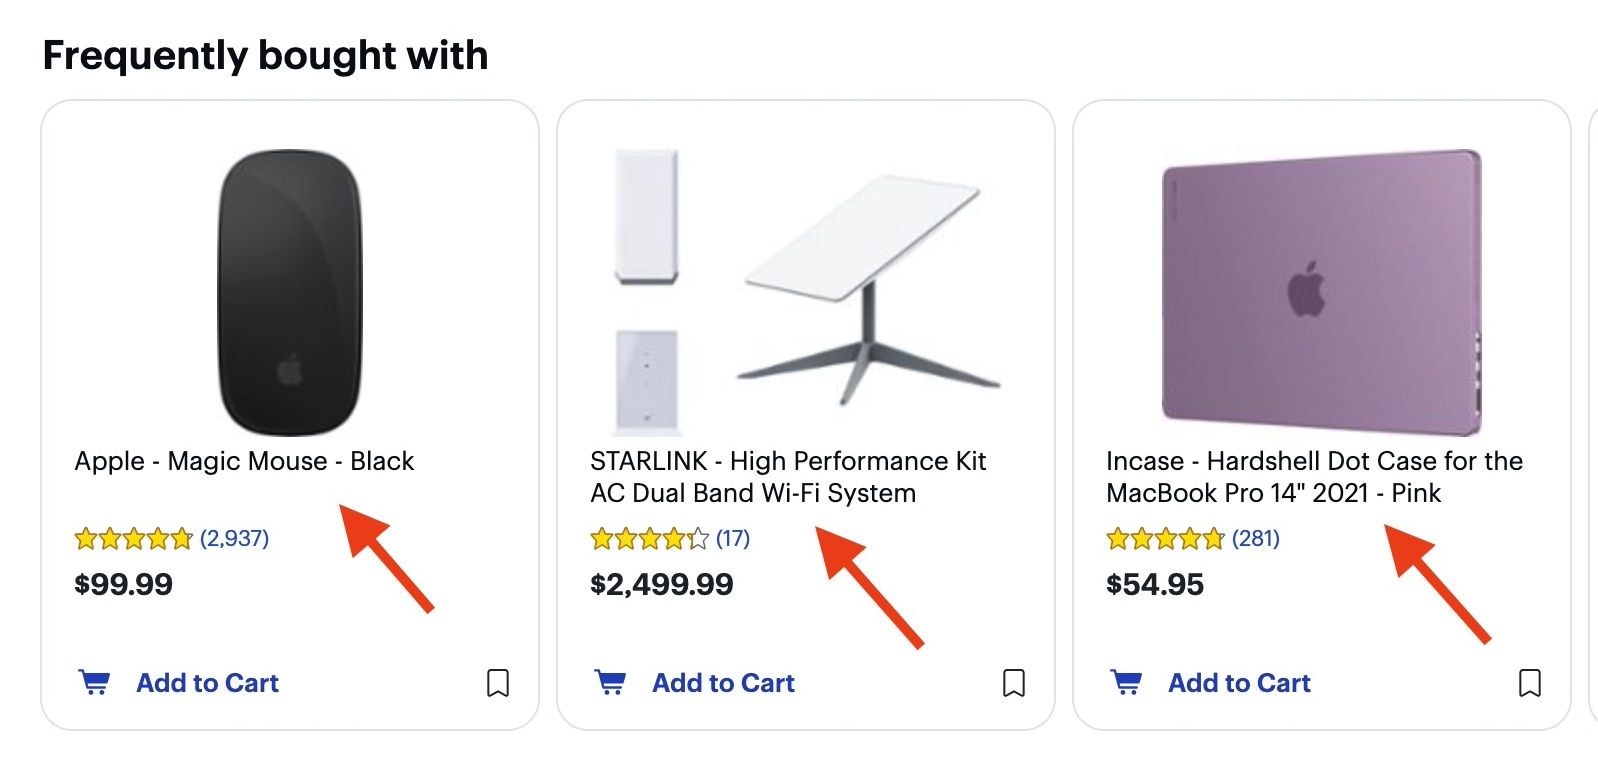 Screenshot from BestBuy.com of "Frequently bought with" items on a MacBook Pro product detail page.